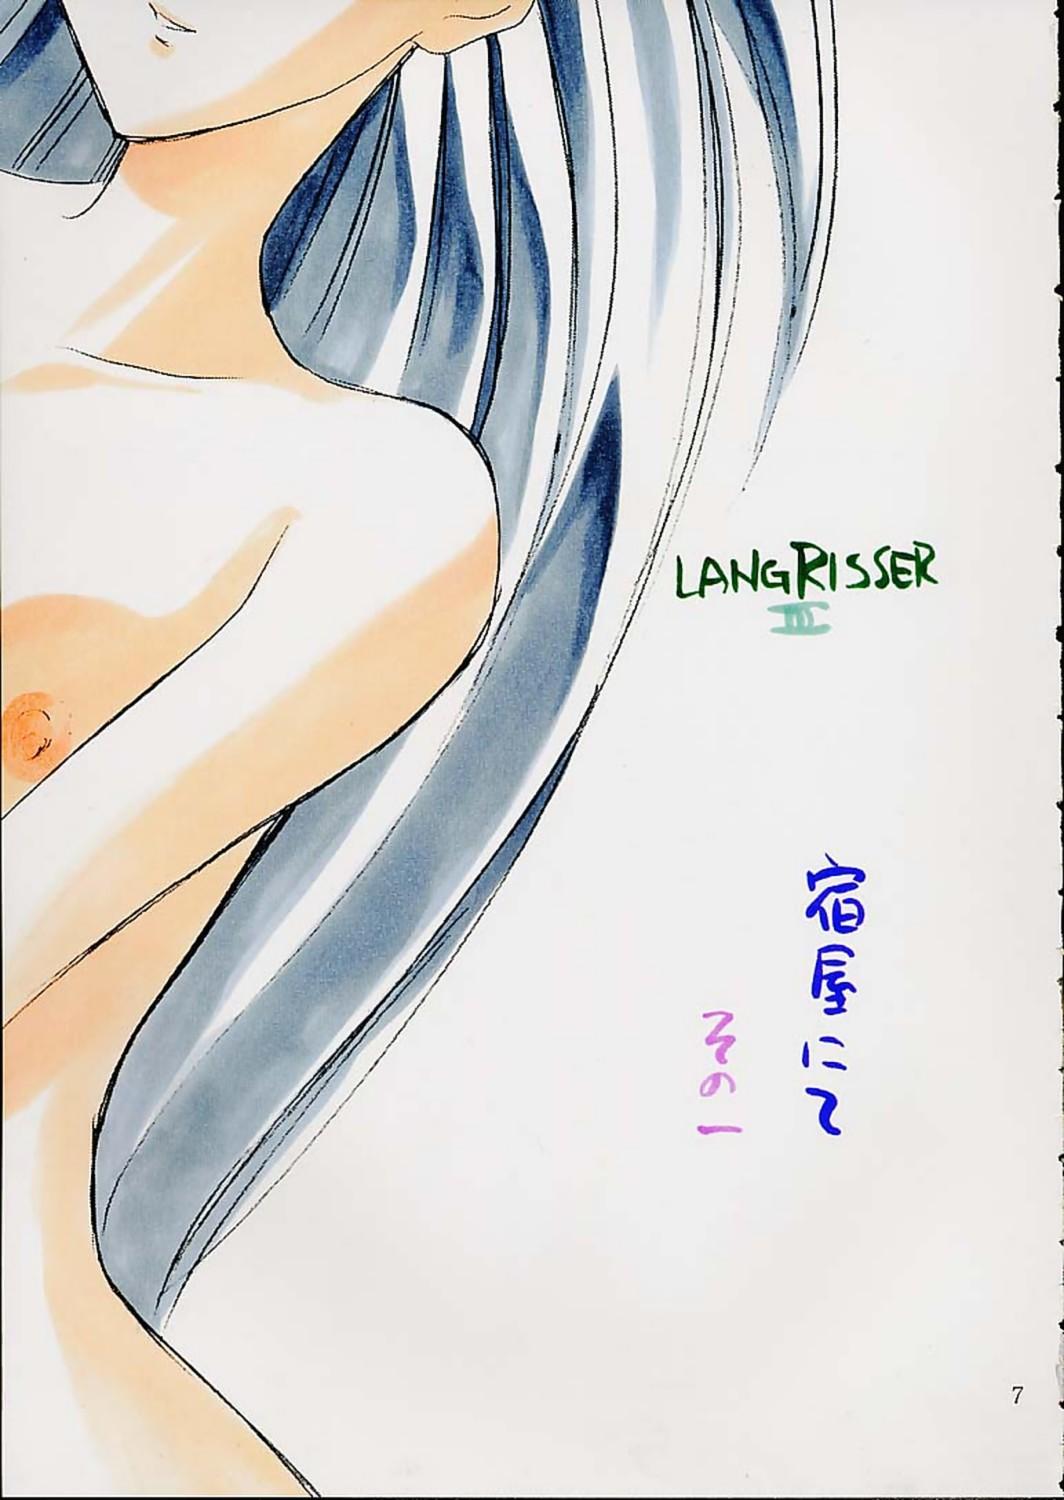 Sexcams WHAT IS LOVE - Langrisser Stretch - Page 5